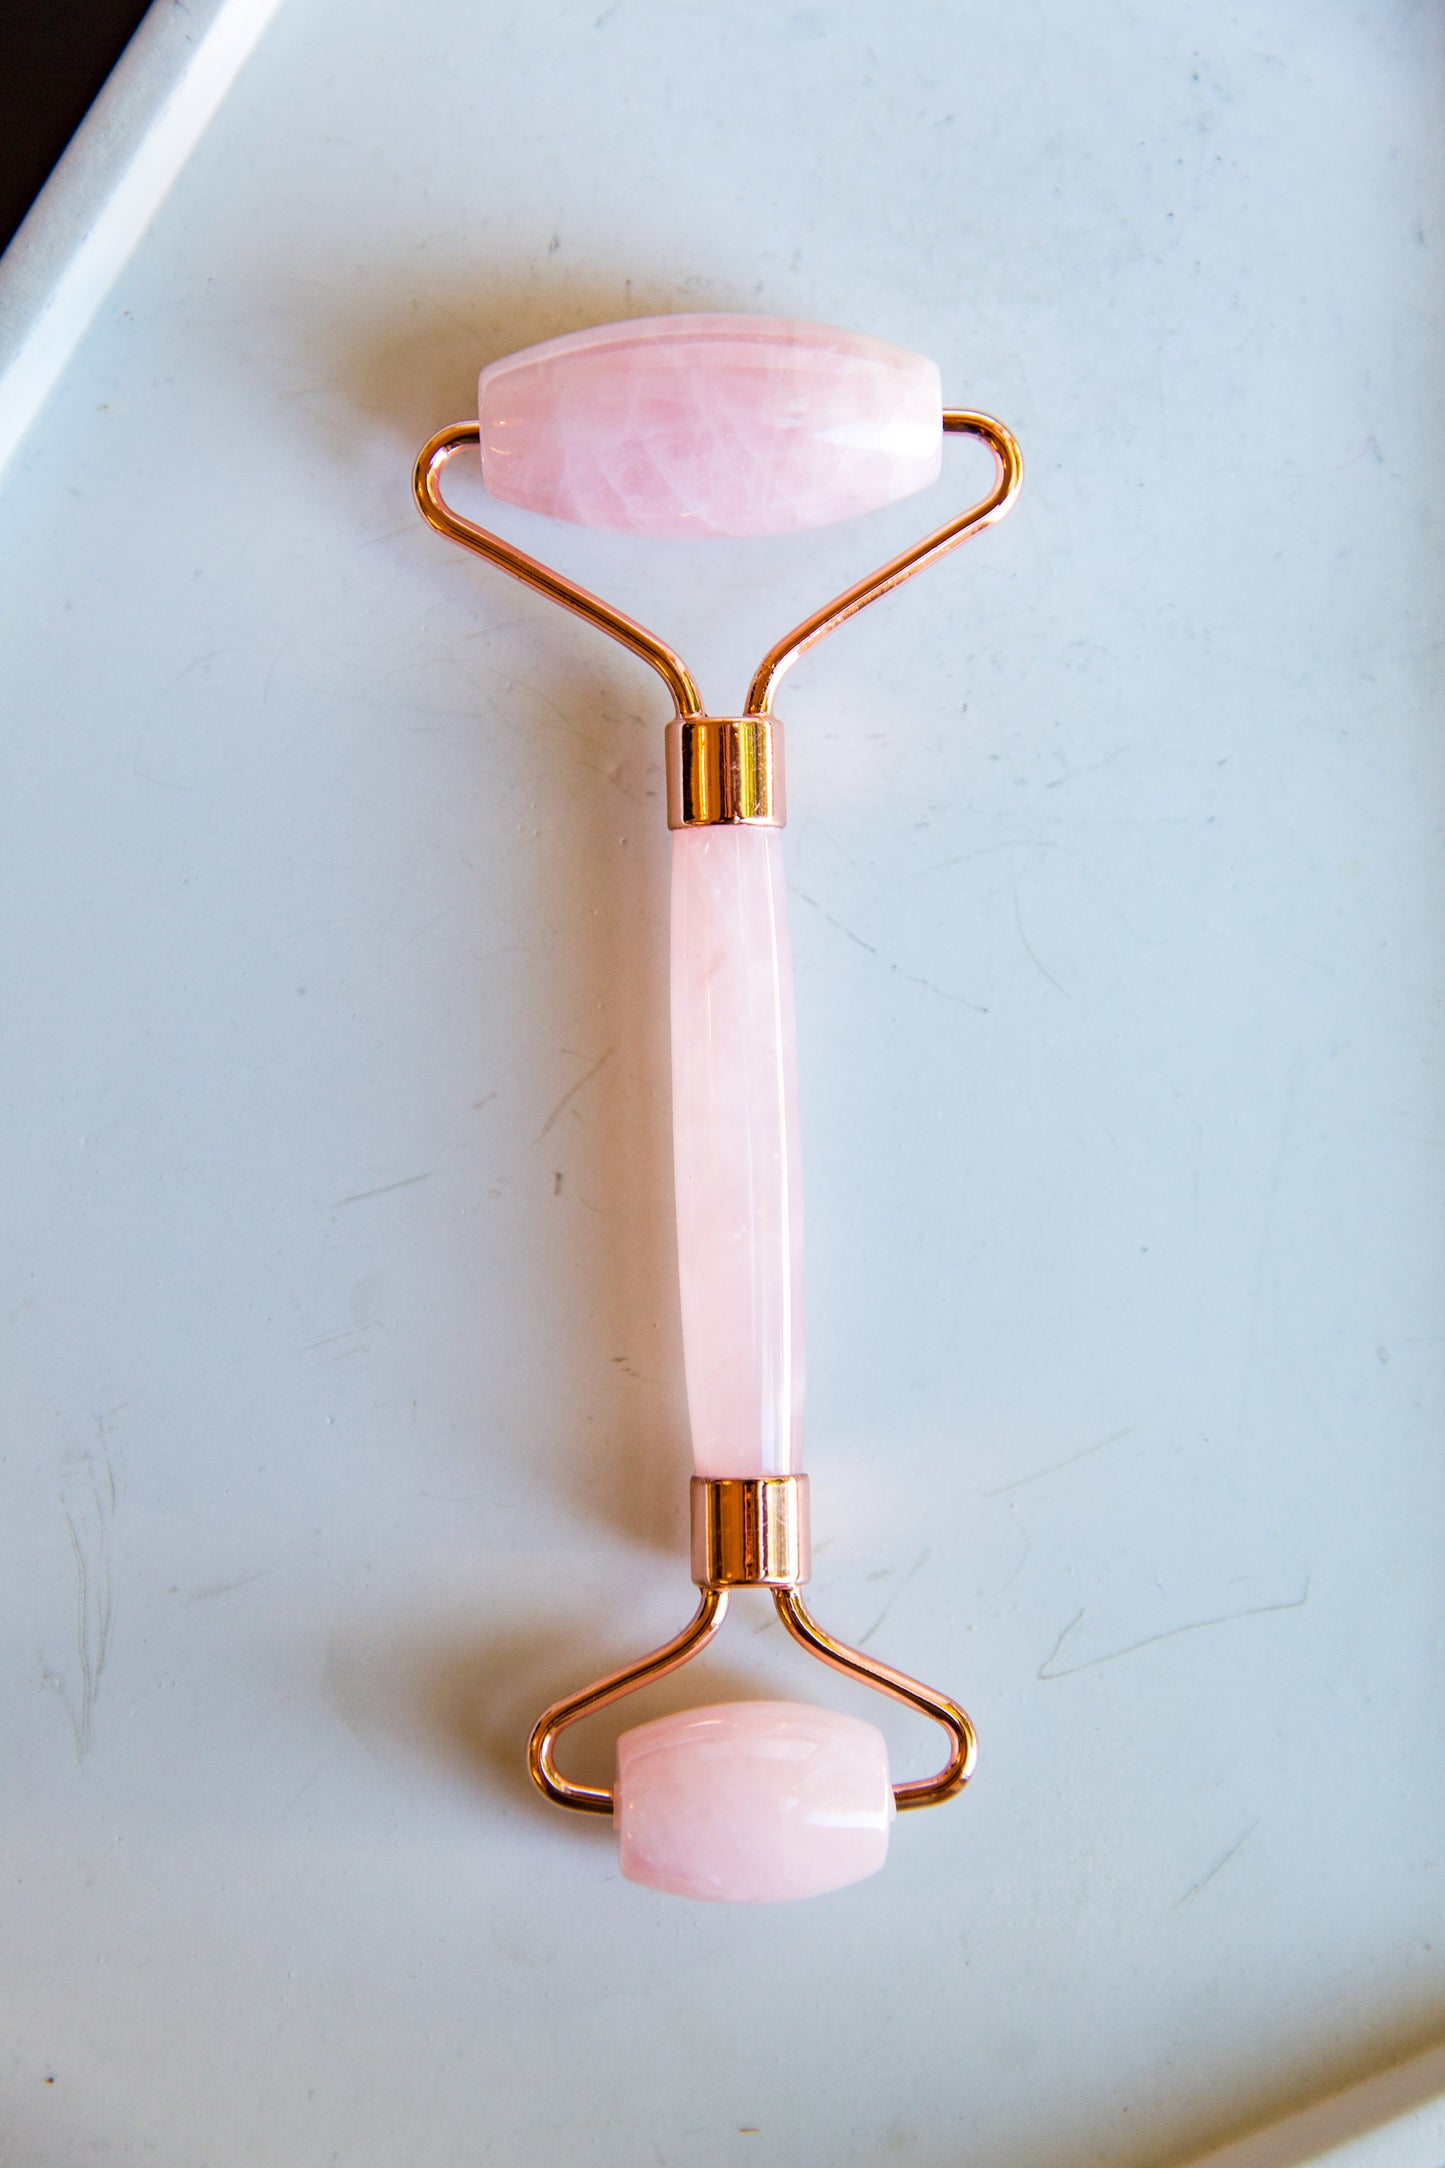 Rose Quartz Roller displayed ready for use